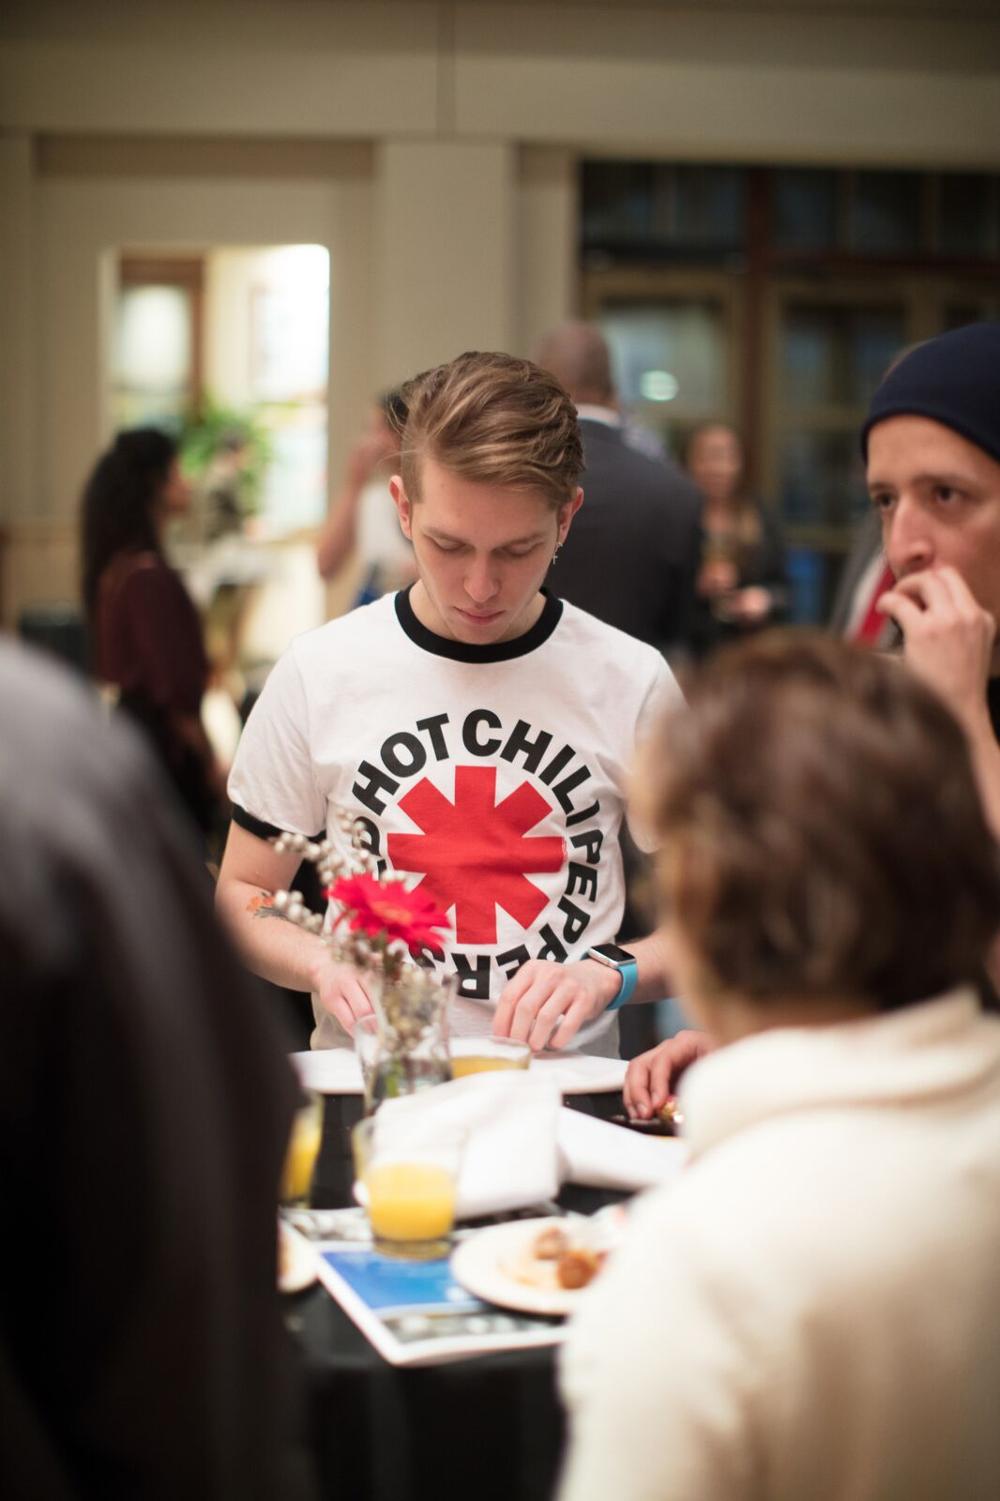 A person in a Red Hot Chili Peppers shirt standing at a small table, looking down at something